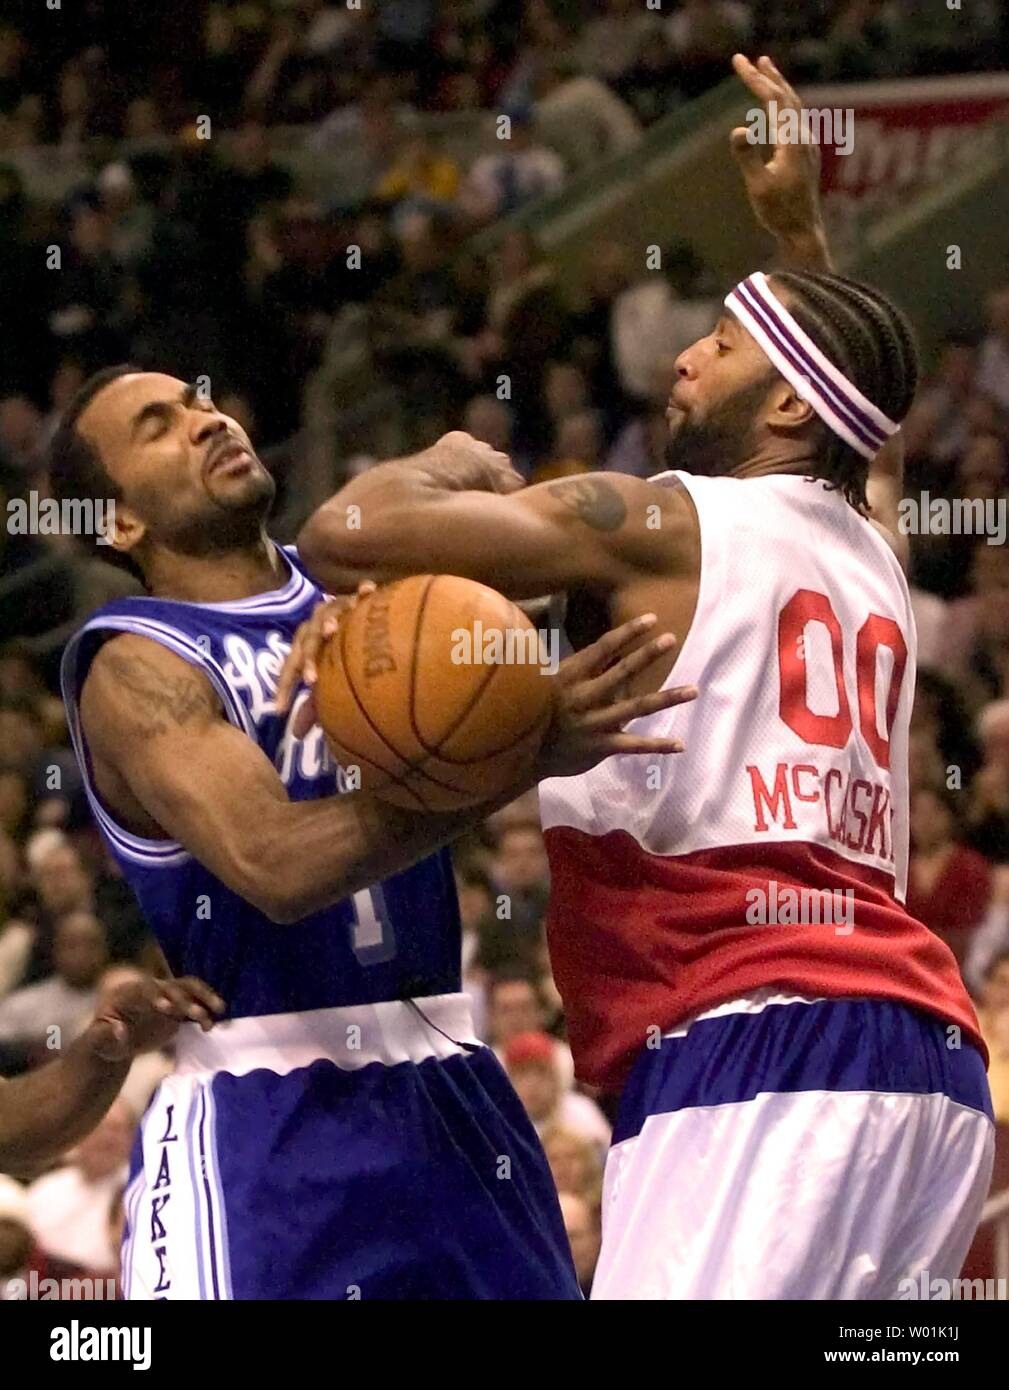 The Lakers' Maurice Carter (1) struggles for the rebound with the 76ers'  Amal McCaskill (00) as Philadelphia hosts Los Angeles in an evening game at  the Wachovia Center in Philadelphia, on February